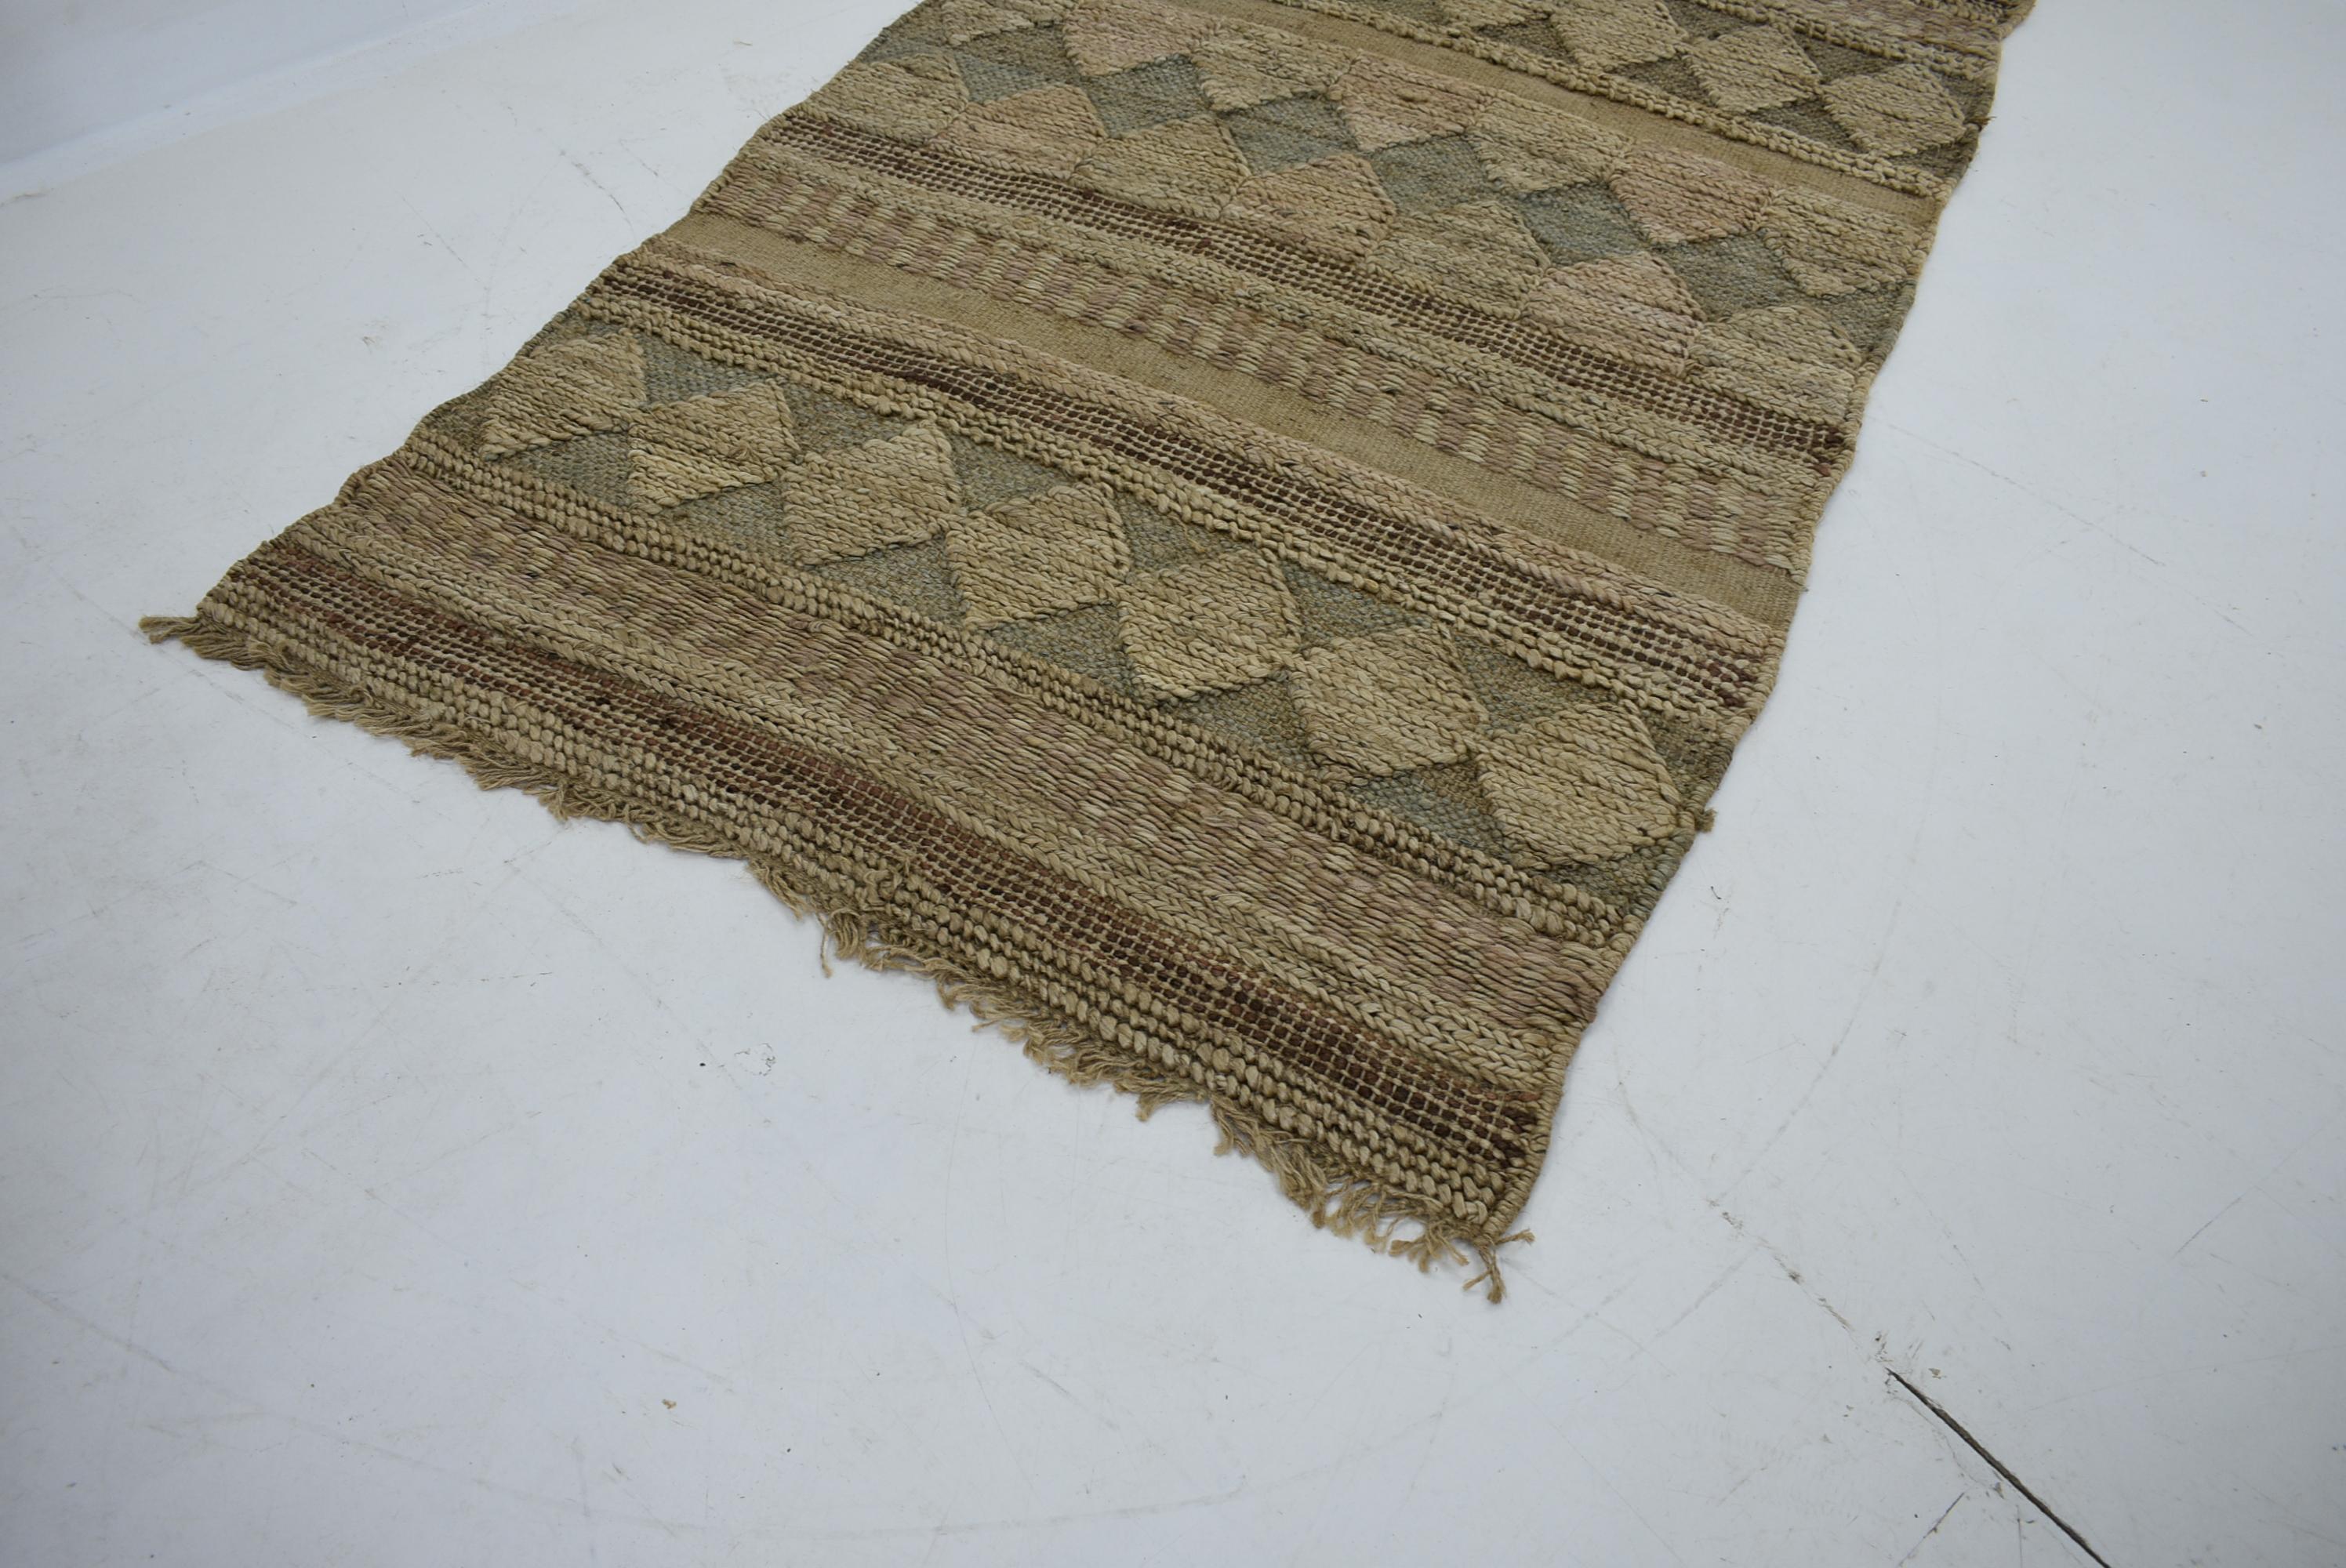 Czech Geometric Abstract Design Carpet / Rug, 1950s For Sale